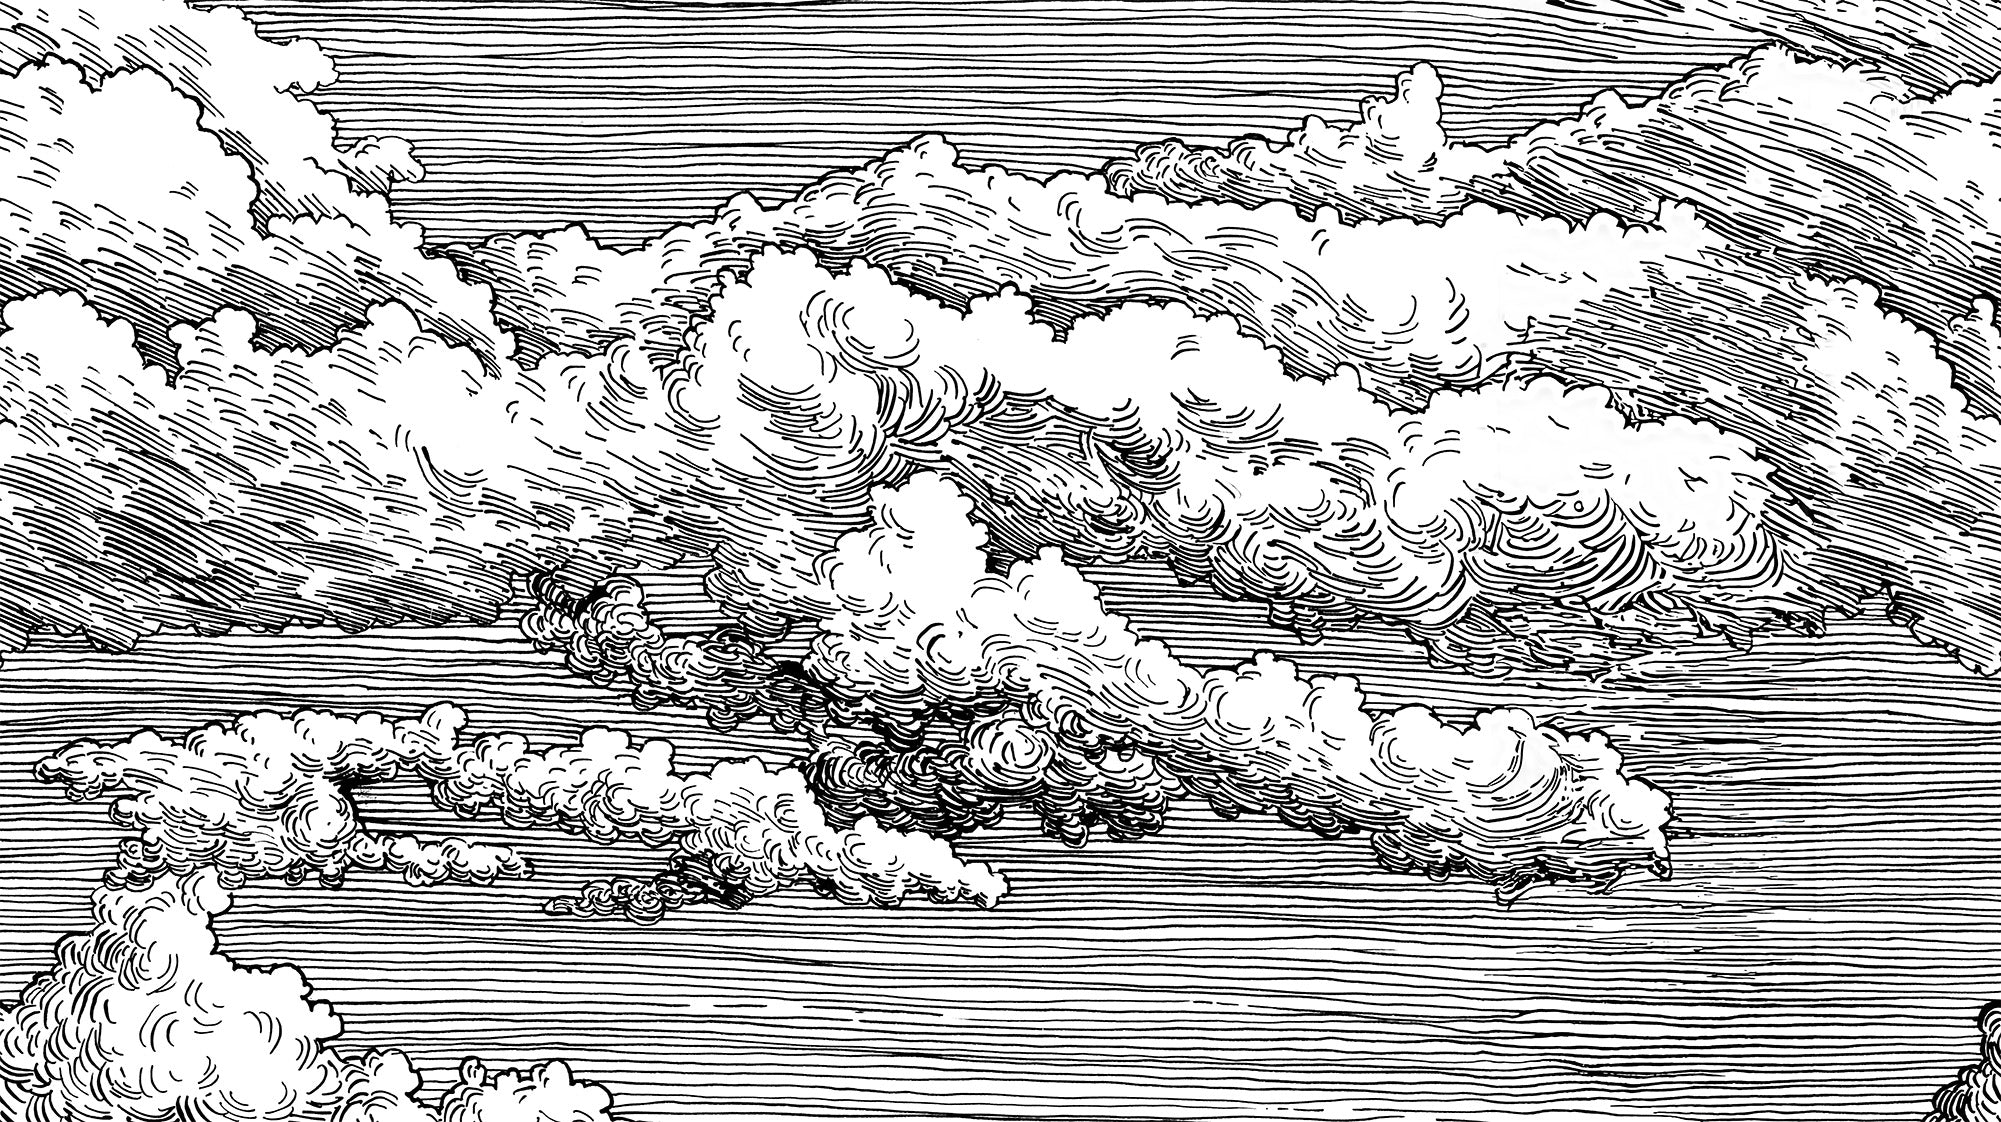 Abut - Black & White Monochrome Clouds Etched Line Drawing Art Wallpaper Mural